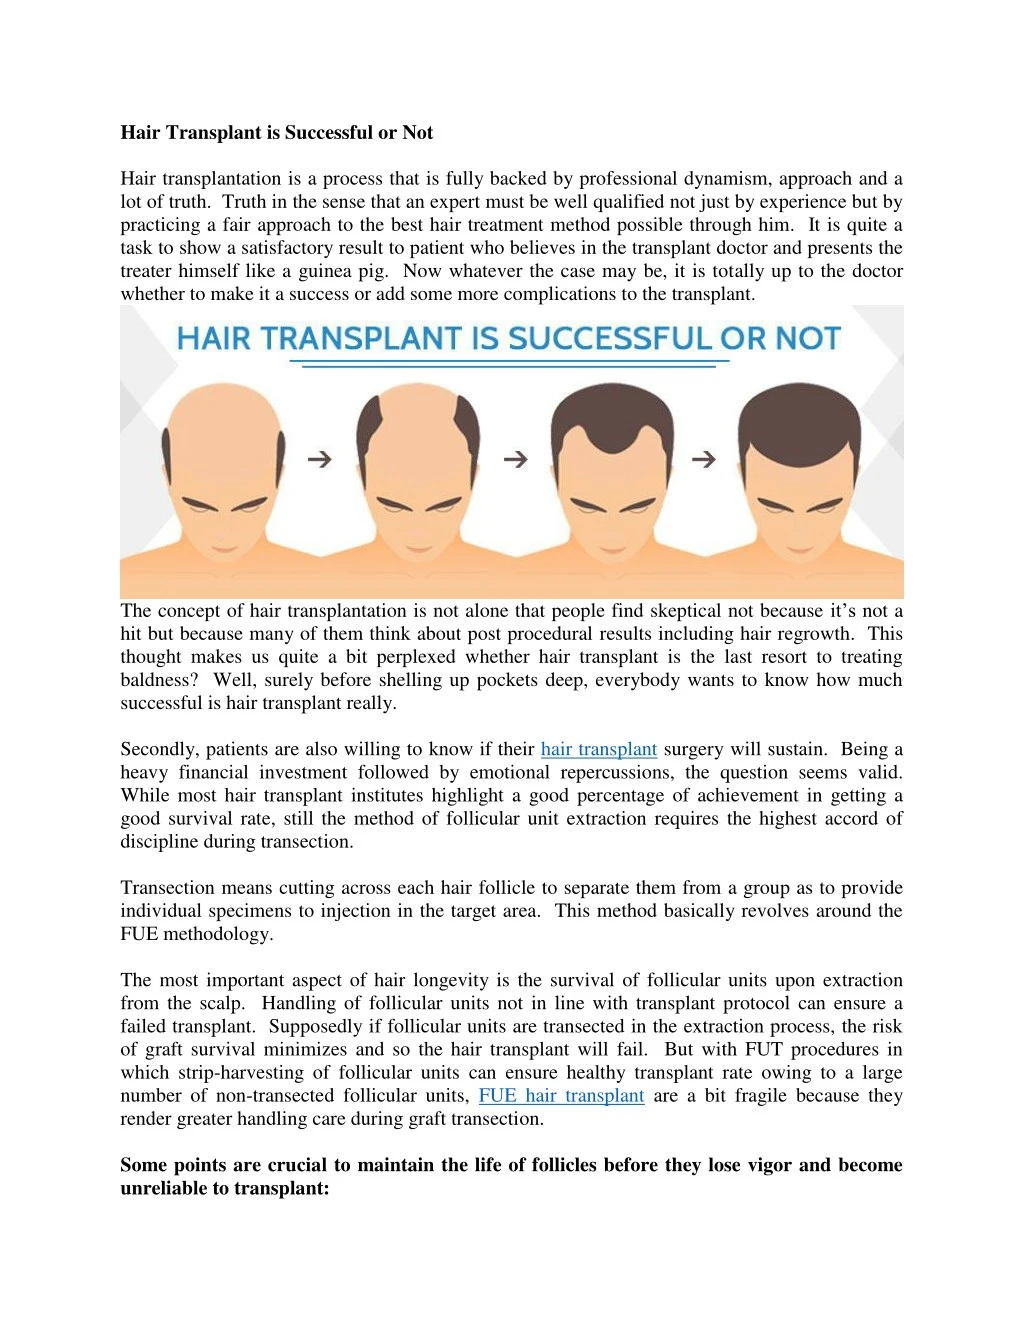 hair transplant is successful or not hair